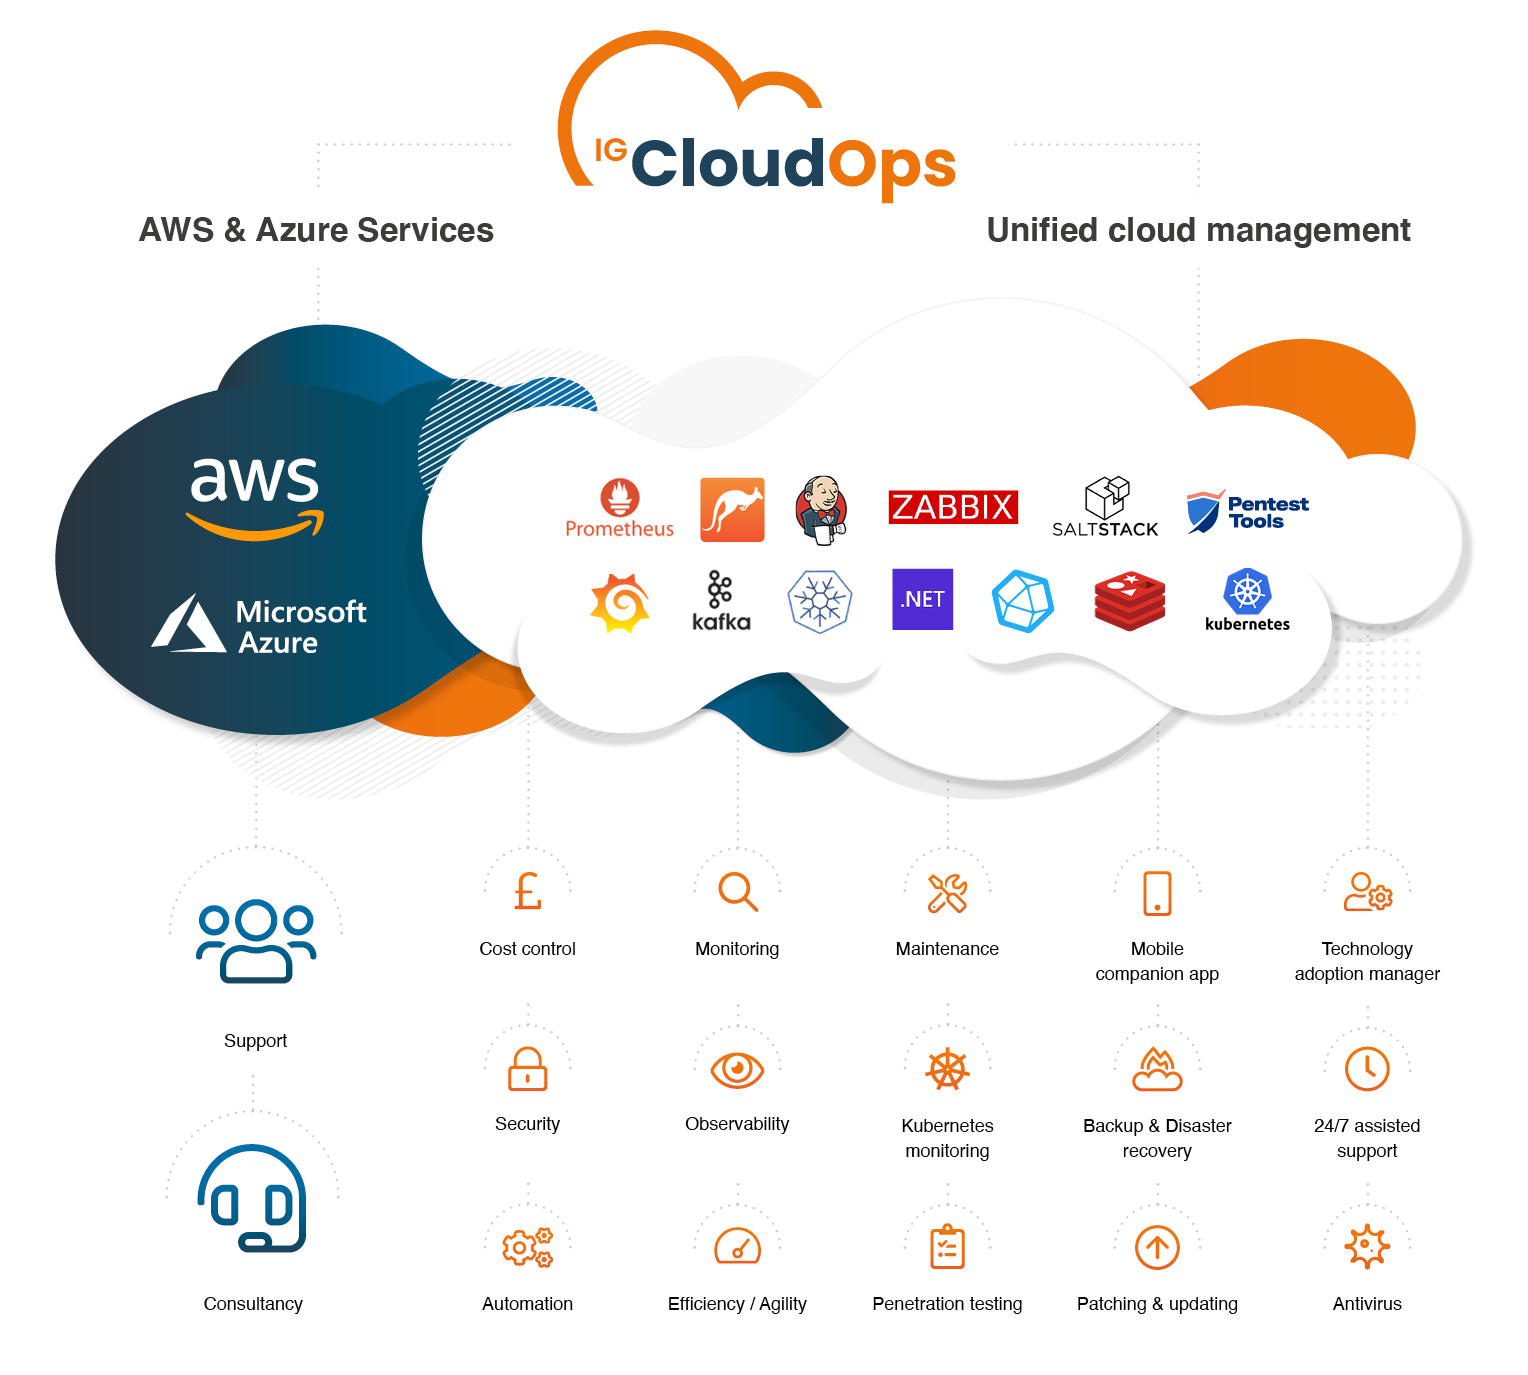 IG CloudOps Services Overview